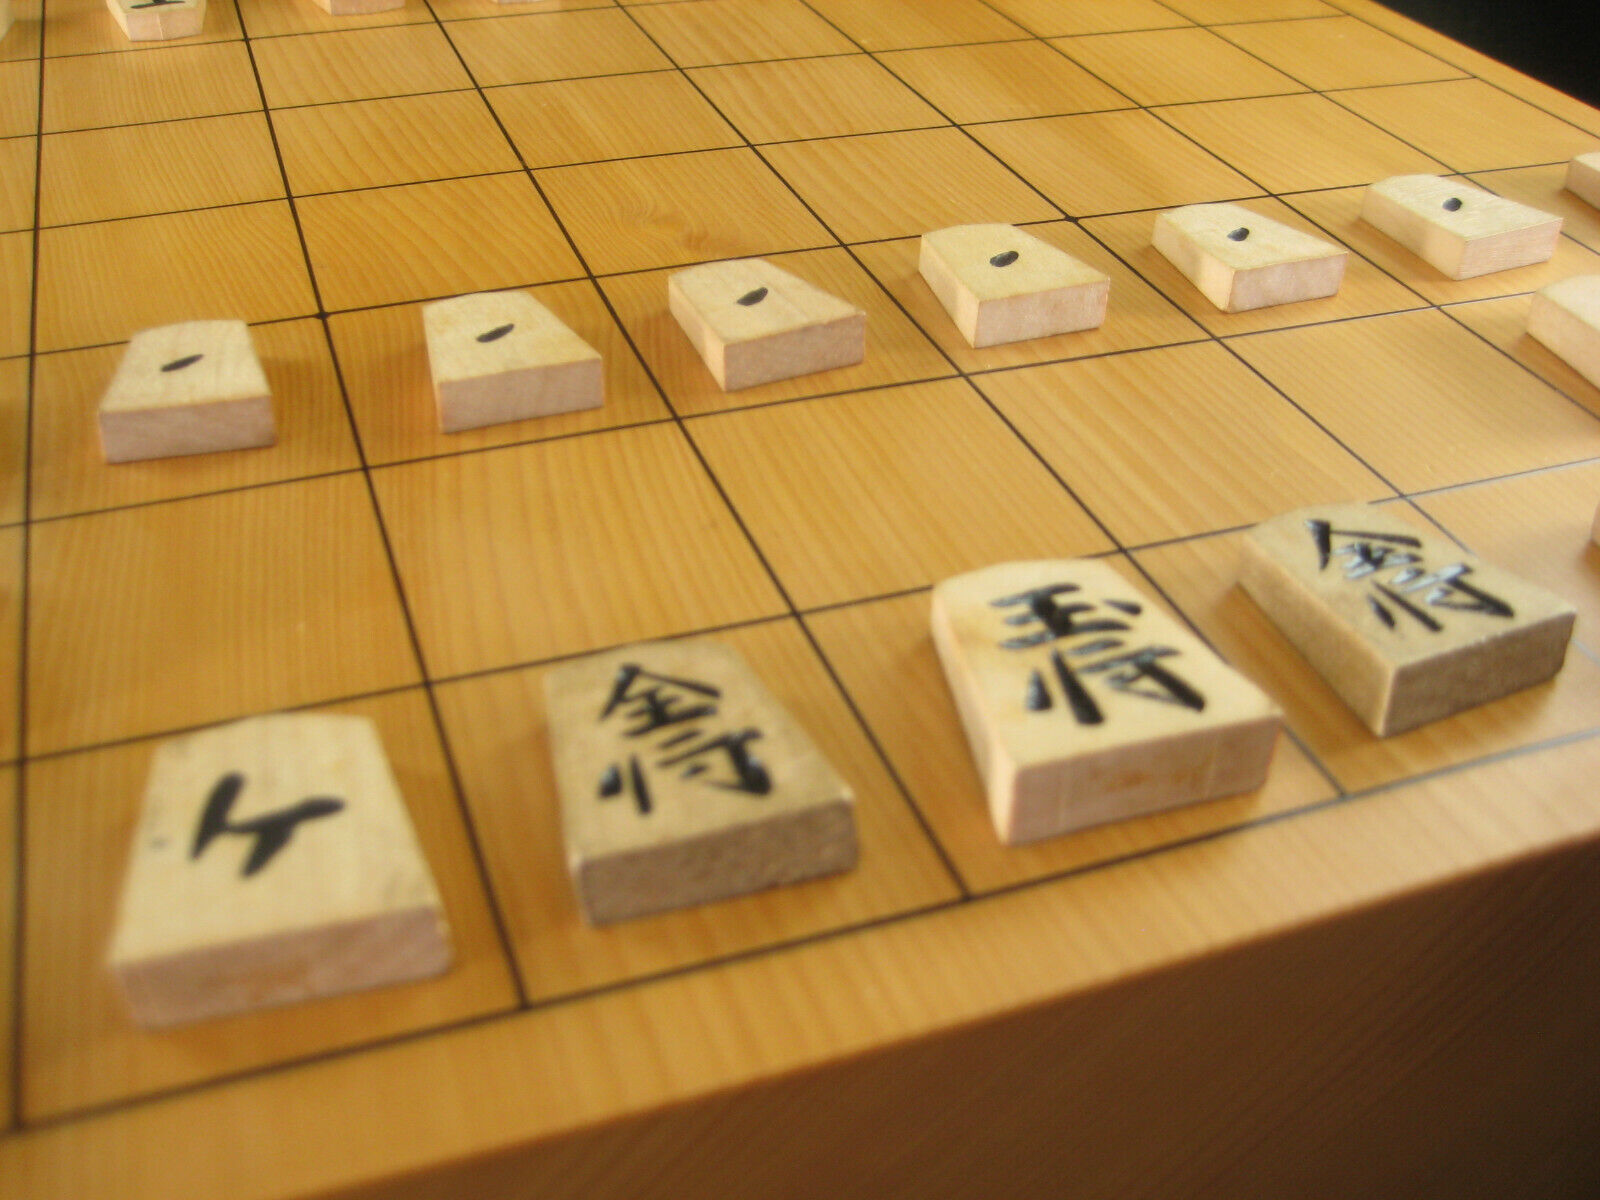 Shogi Japanese Chess Game Set - Wooden Table Board with Drawers and  Traditional Koma Playing Pieces 